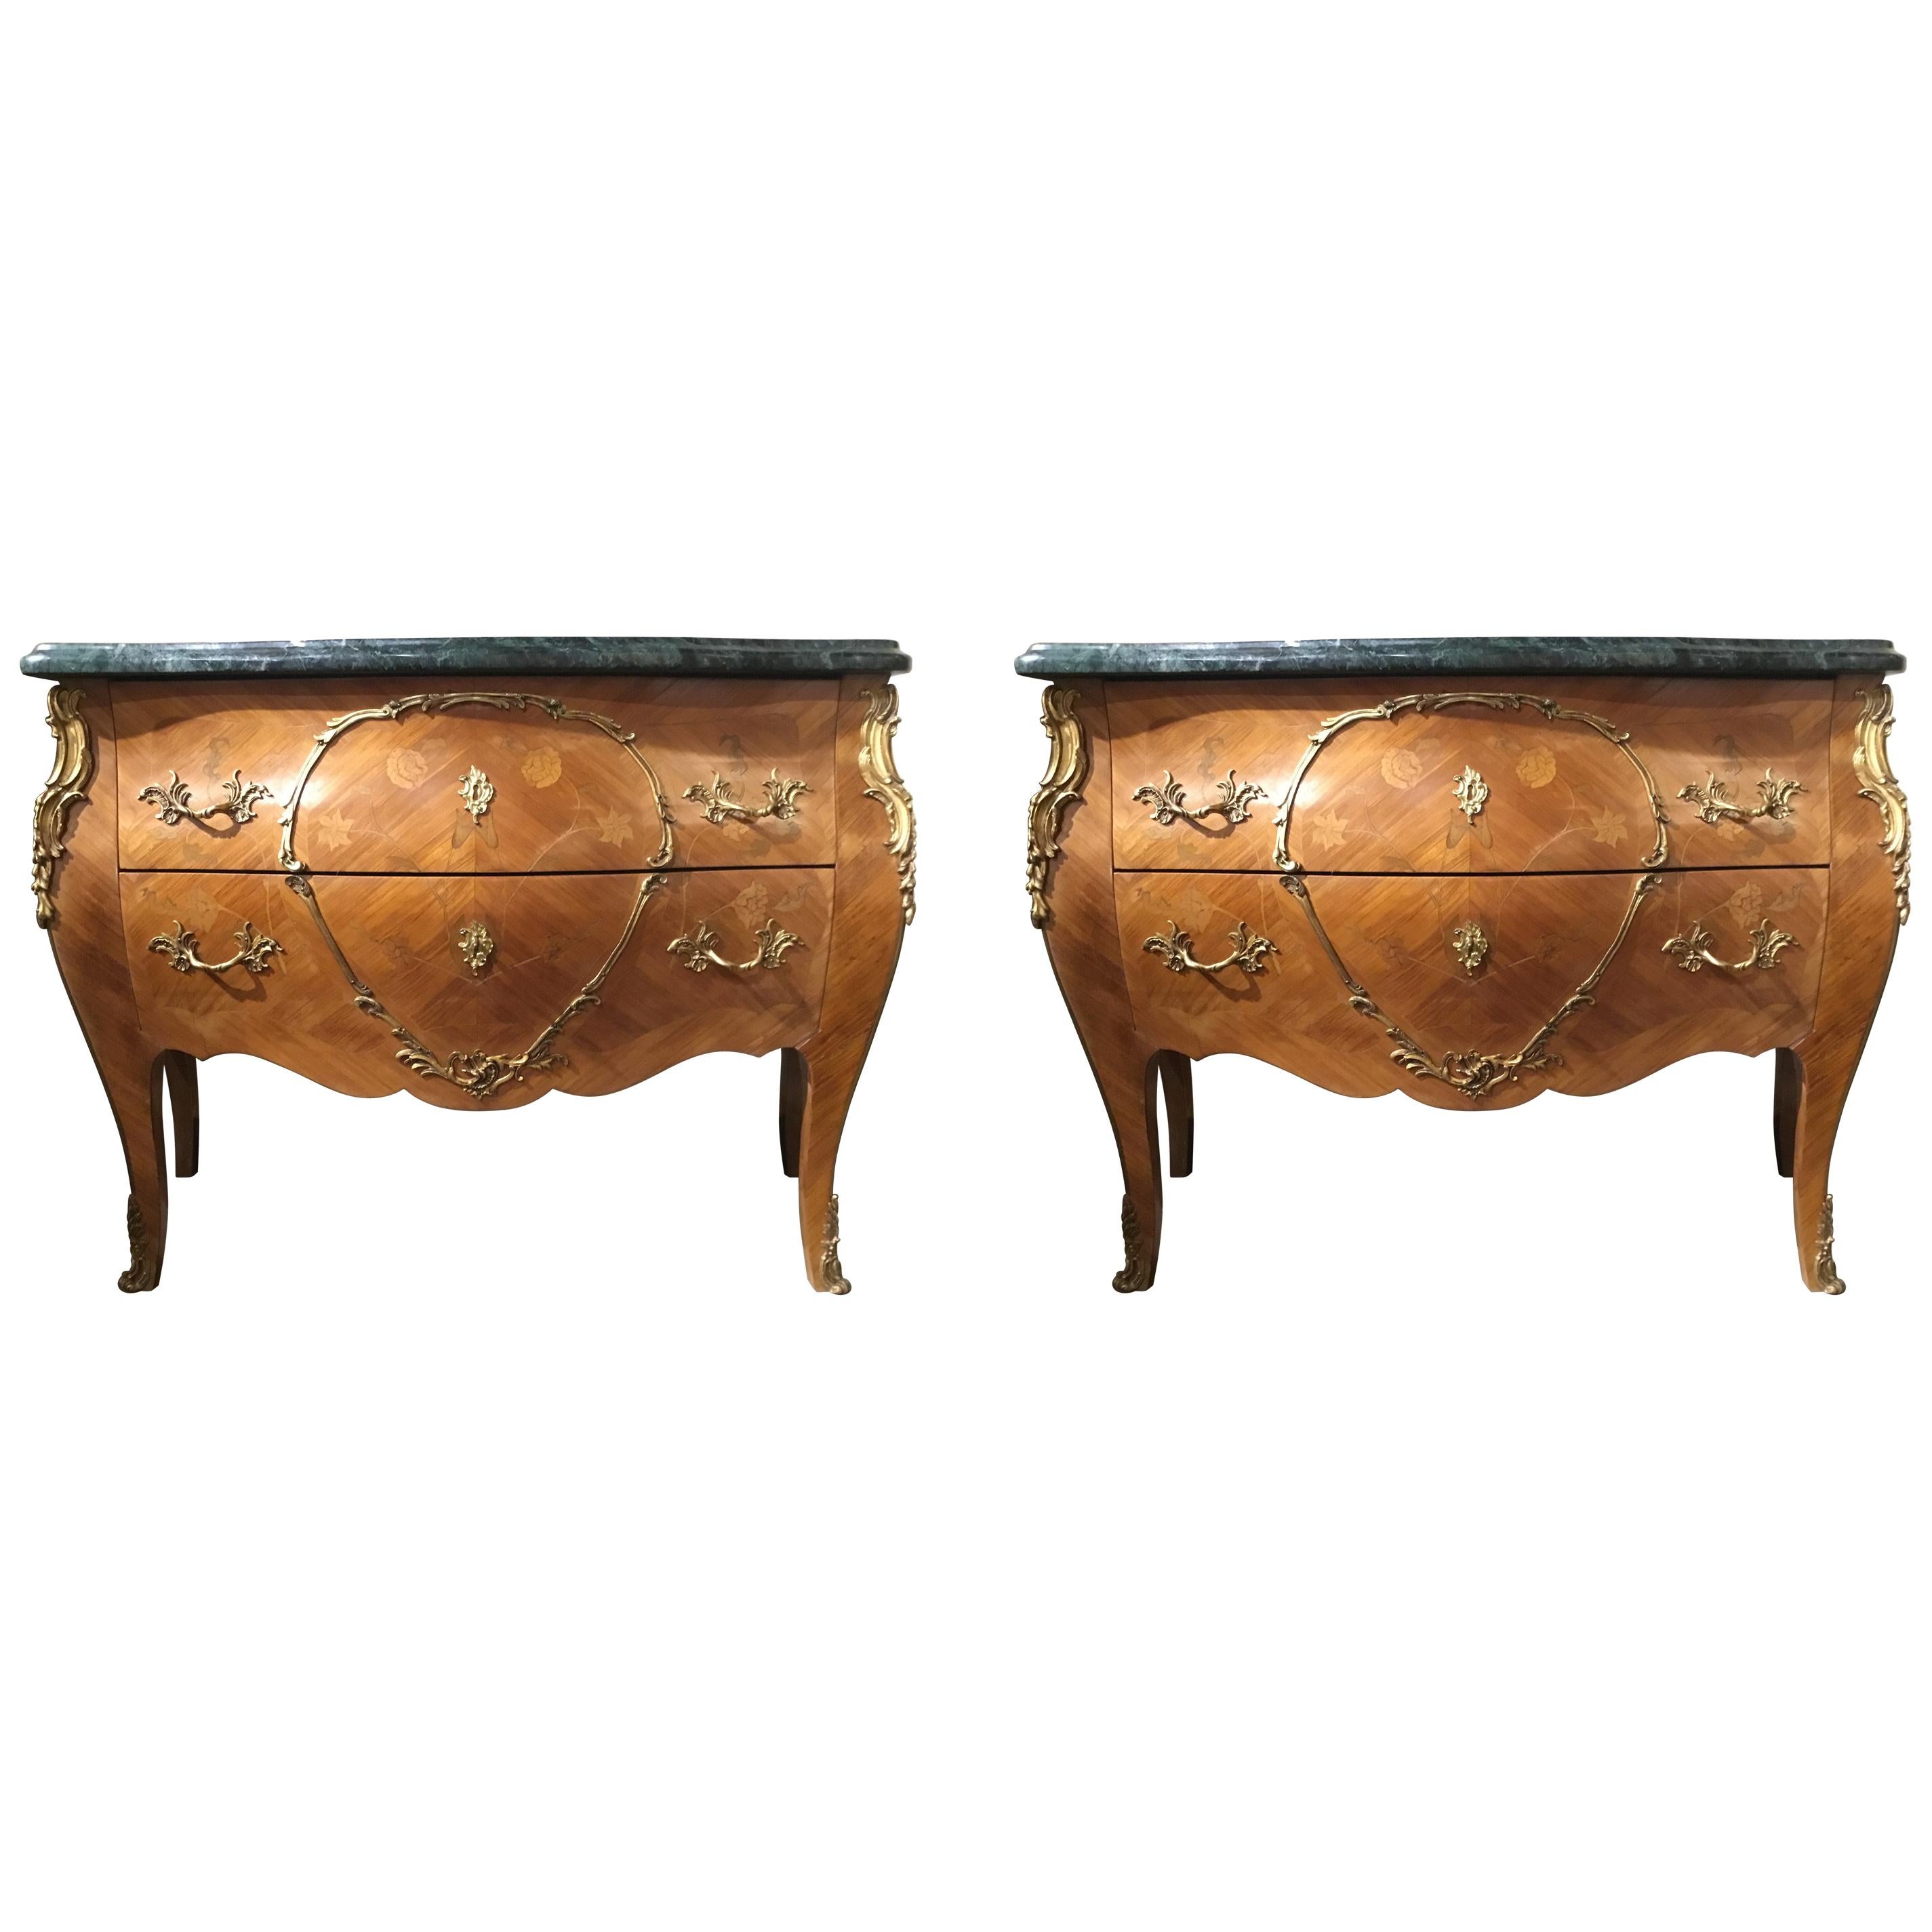 Pair of 19th Century French Commodes, Marble Top in Verde, Bombe-Form circa 1890